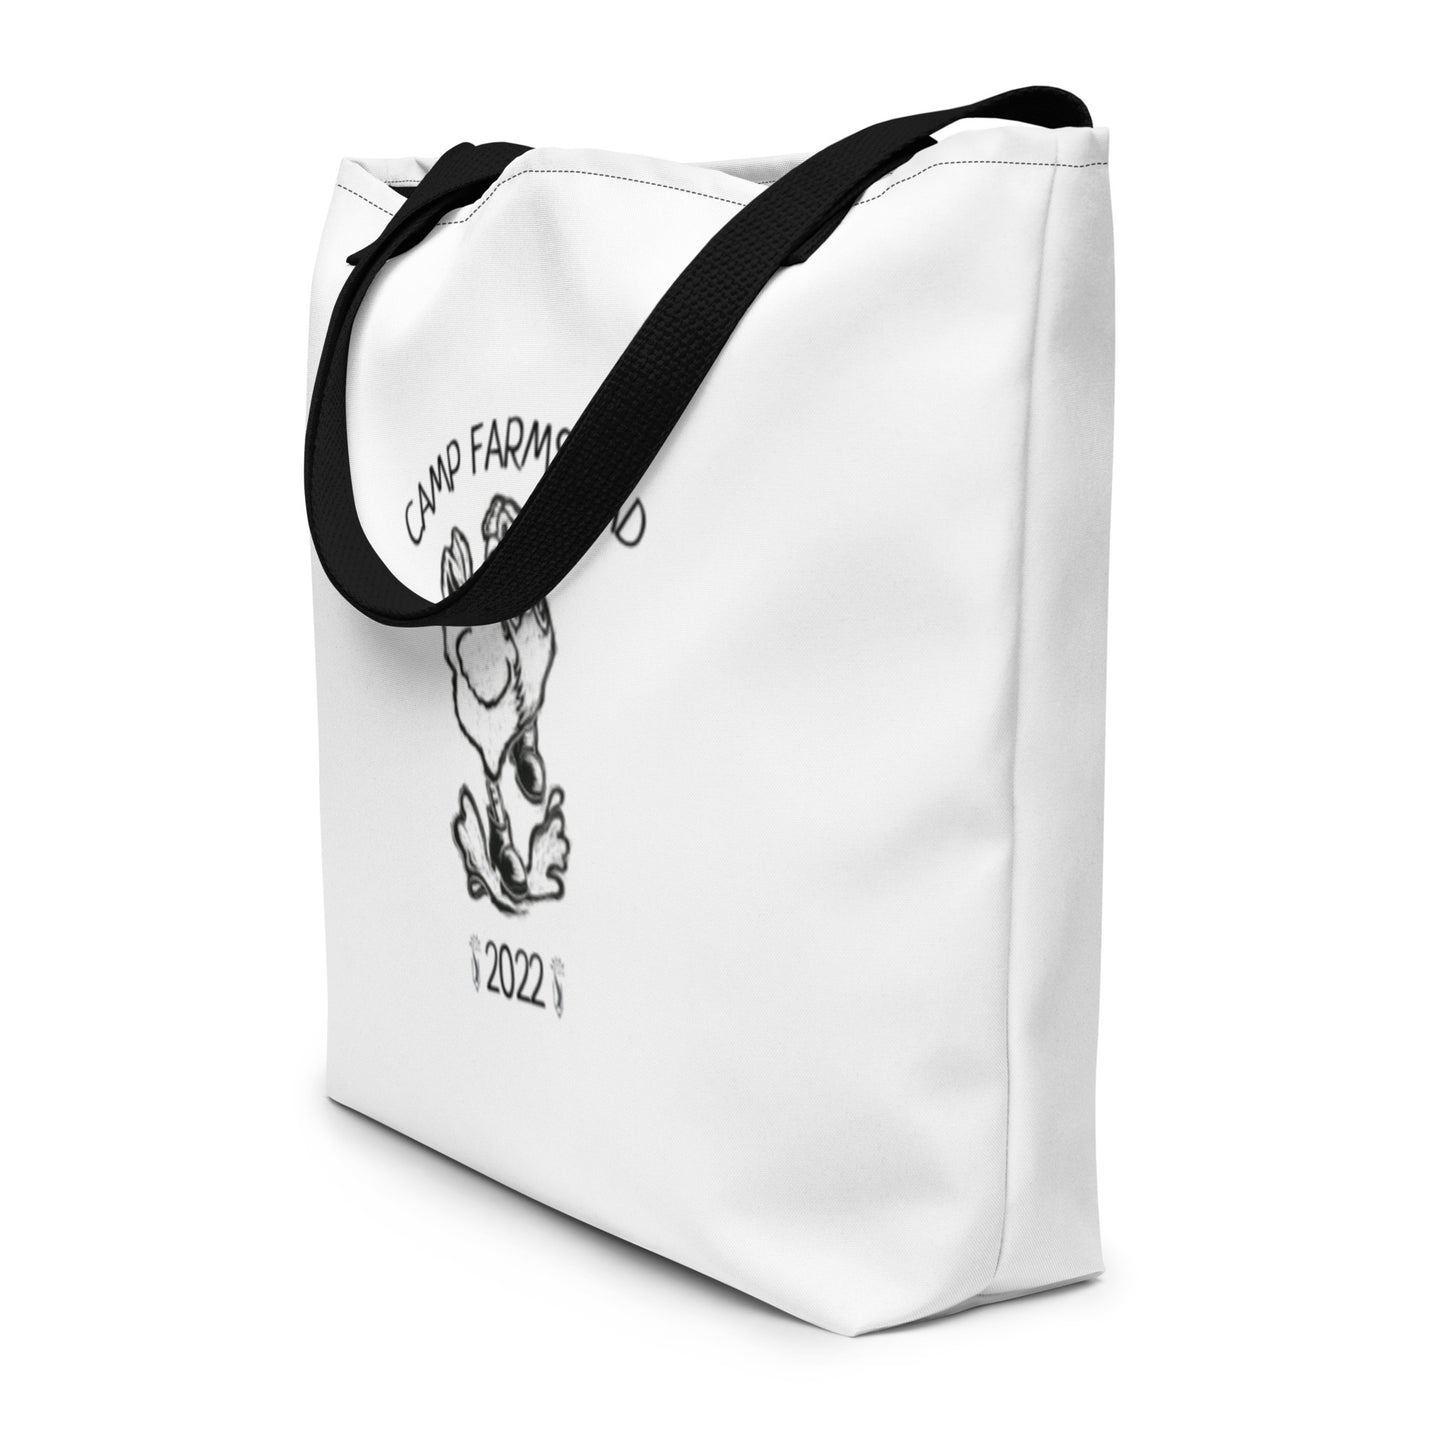 Camp Farmstead All-Over Print Large Tote Bag